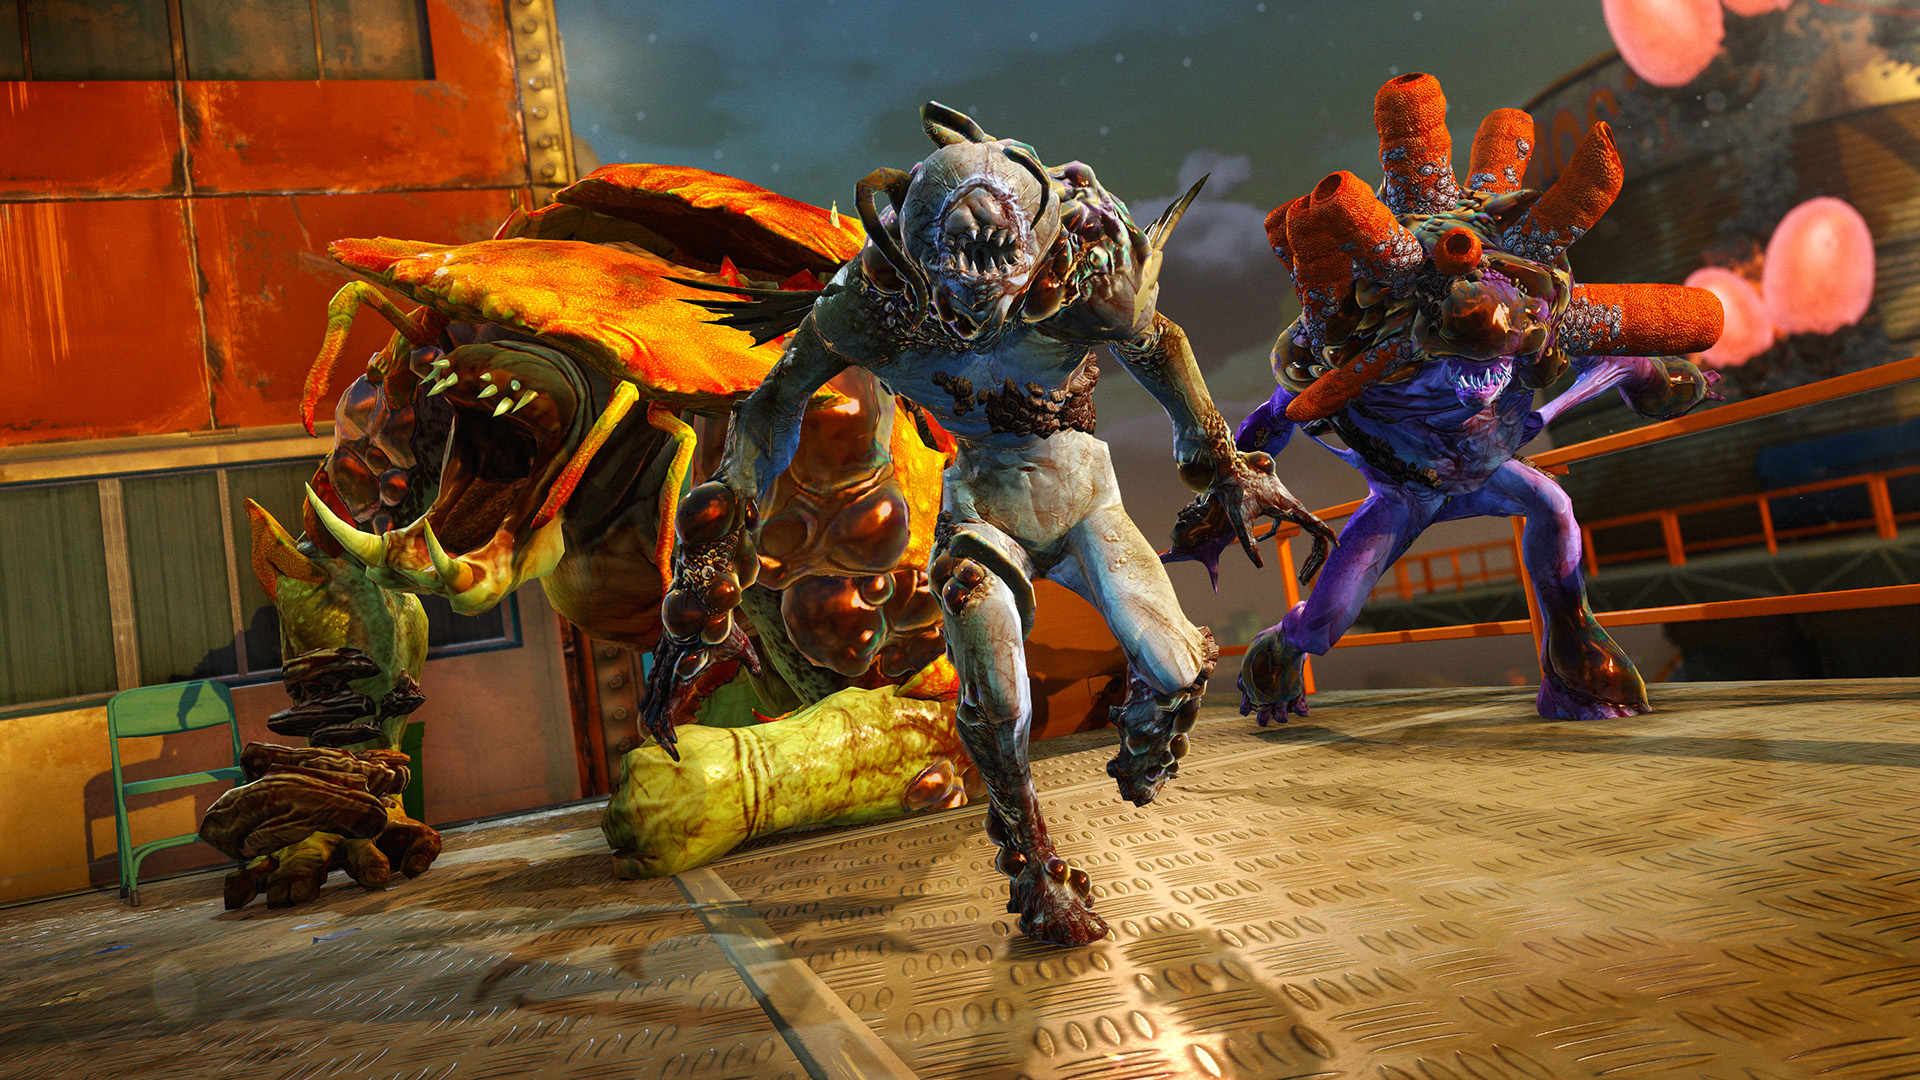 Have You Played Sunset Overdrive?